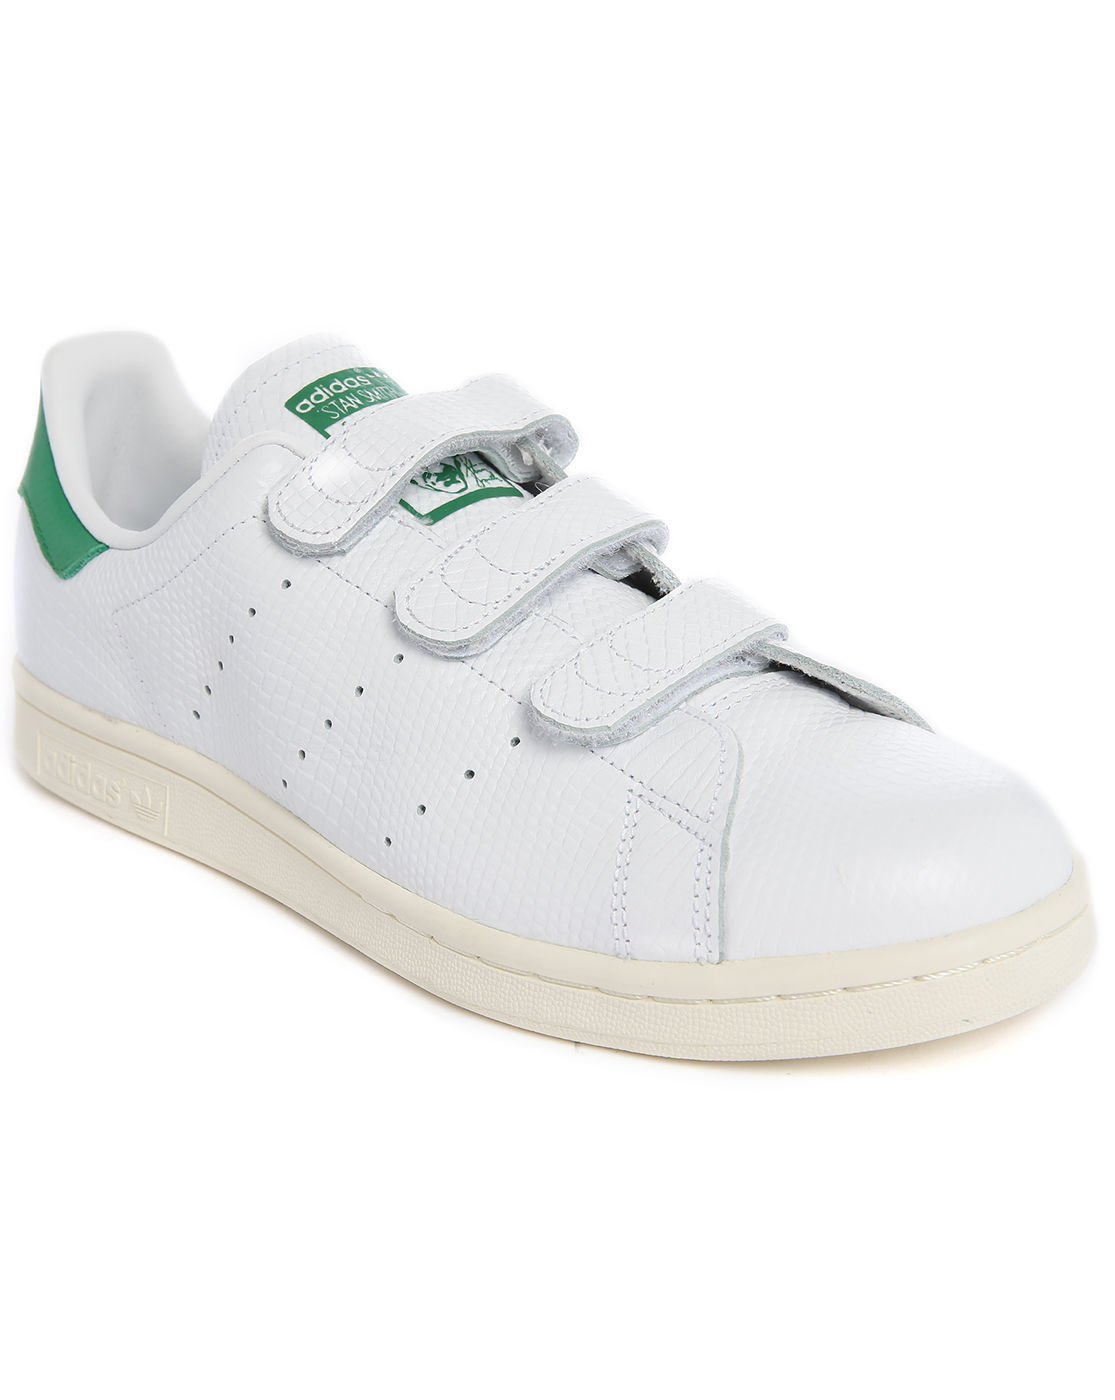 Adidas originals Stan Smith Velcro White Embossed Leather Sneakers in ...